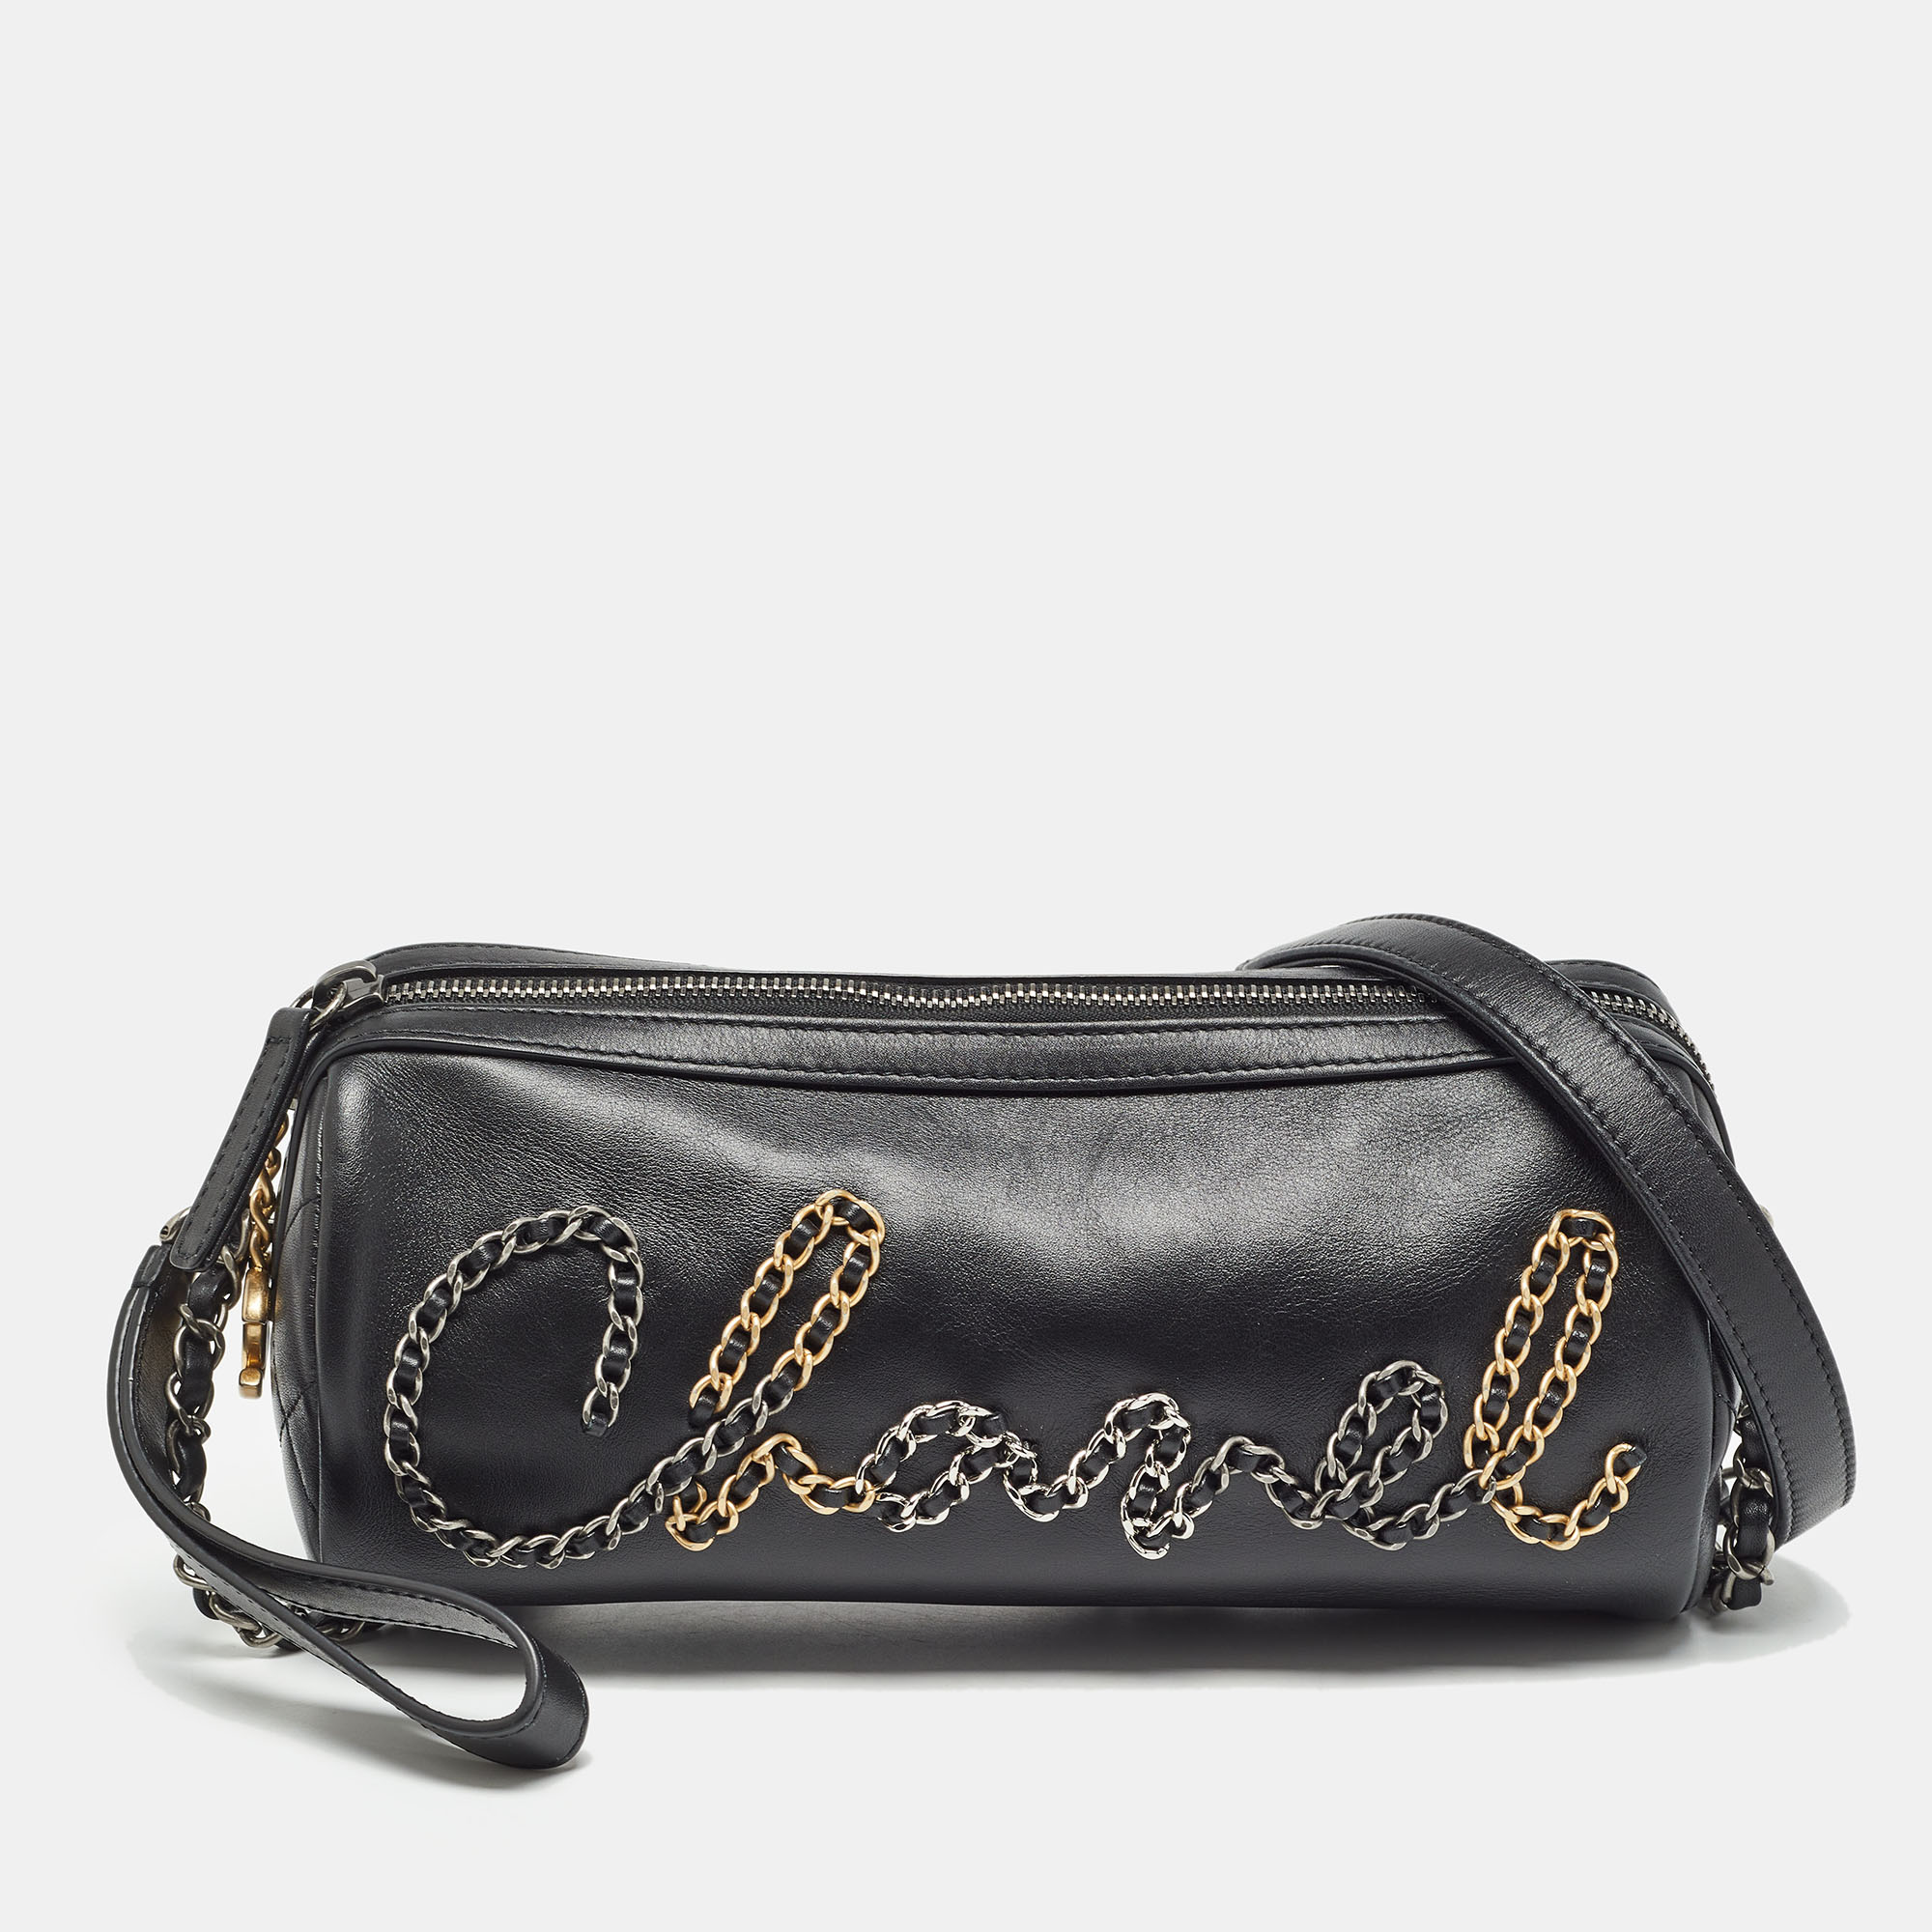 Chanel  black leather chain signature bowler bag